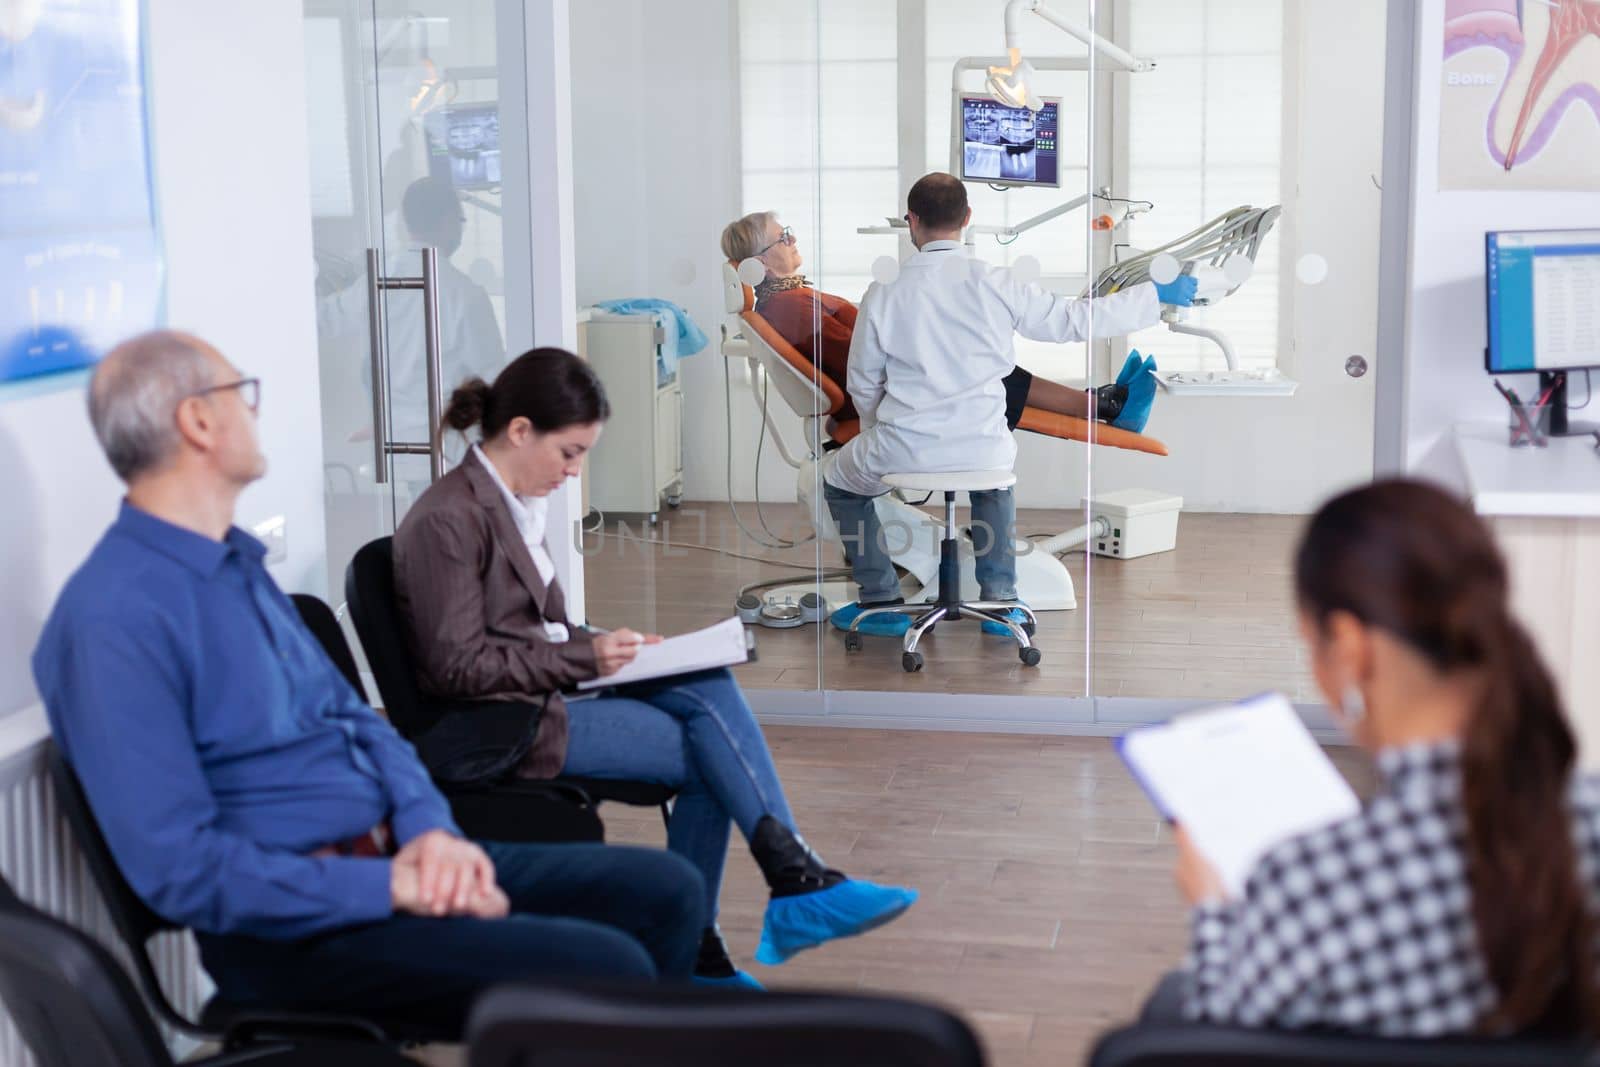 Crowded stomatology waiting area with people filling form by DCStudio